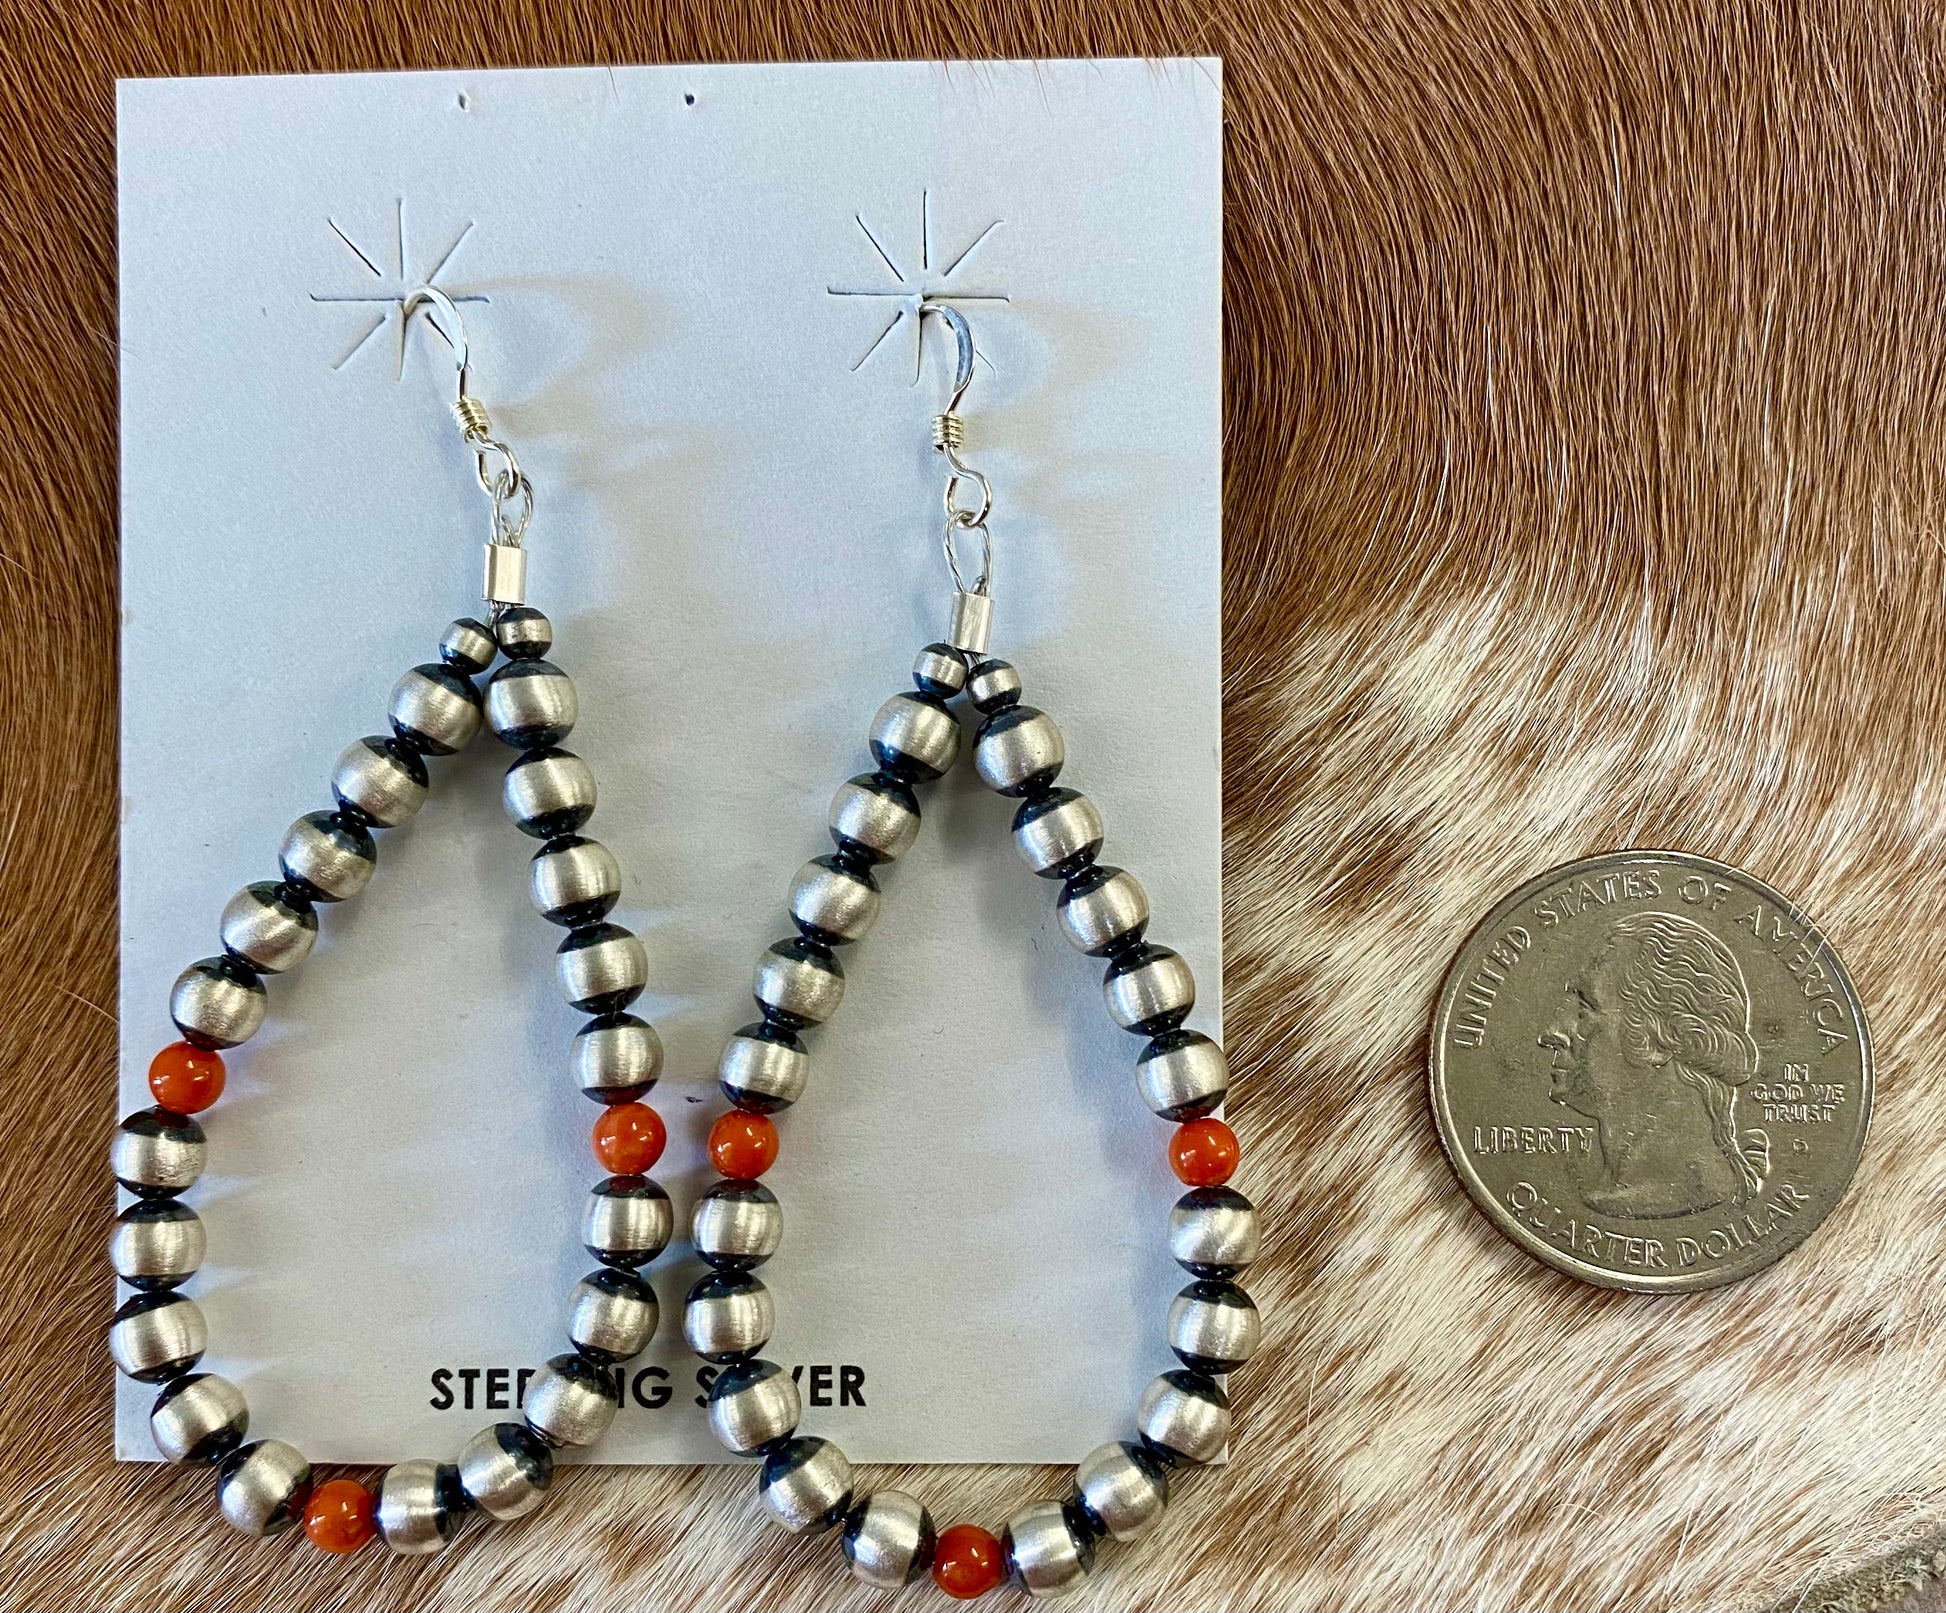 Stunning hook lightweight orange coral native hand strung sterling silver teardrop earrings. The perfect earrings for the fall weather headed our way! The perfect earrings to add to your jewelry collection or gift to a loved one. These Navajo pearl style teardrop earrings are hand strung together. Each of the sterling components are soldered closed to ensure durability and peace of mind.  Size: 2.5” Inches length x 1.25” inches width   Stone: Coral 